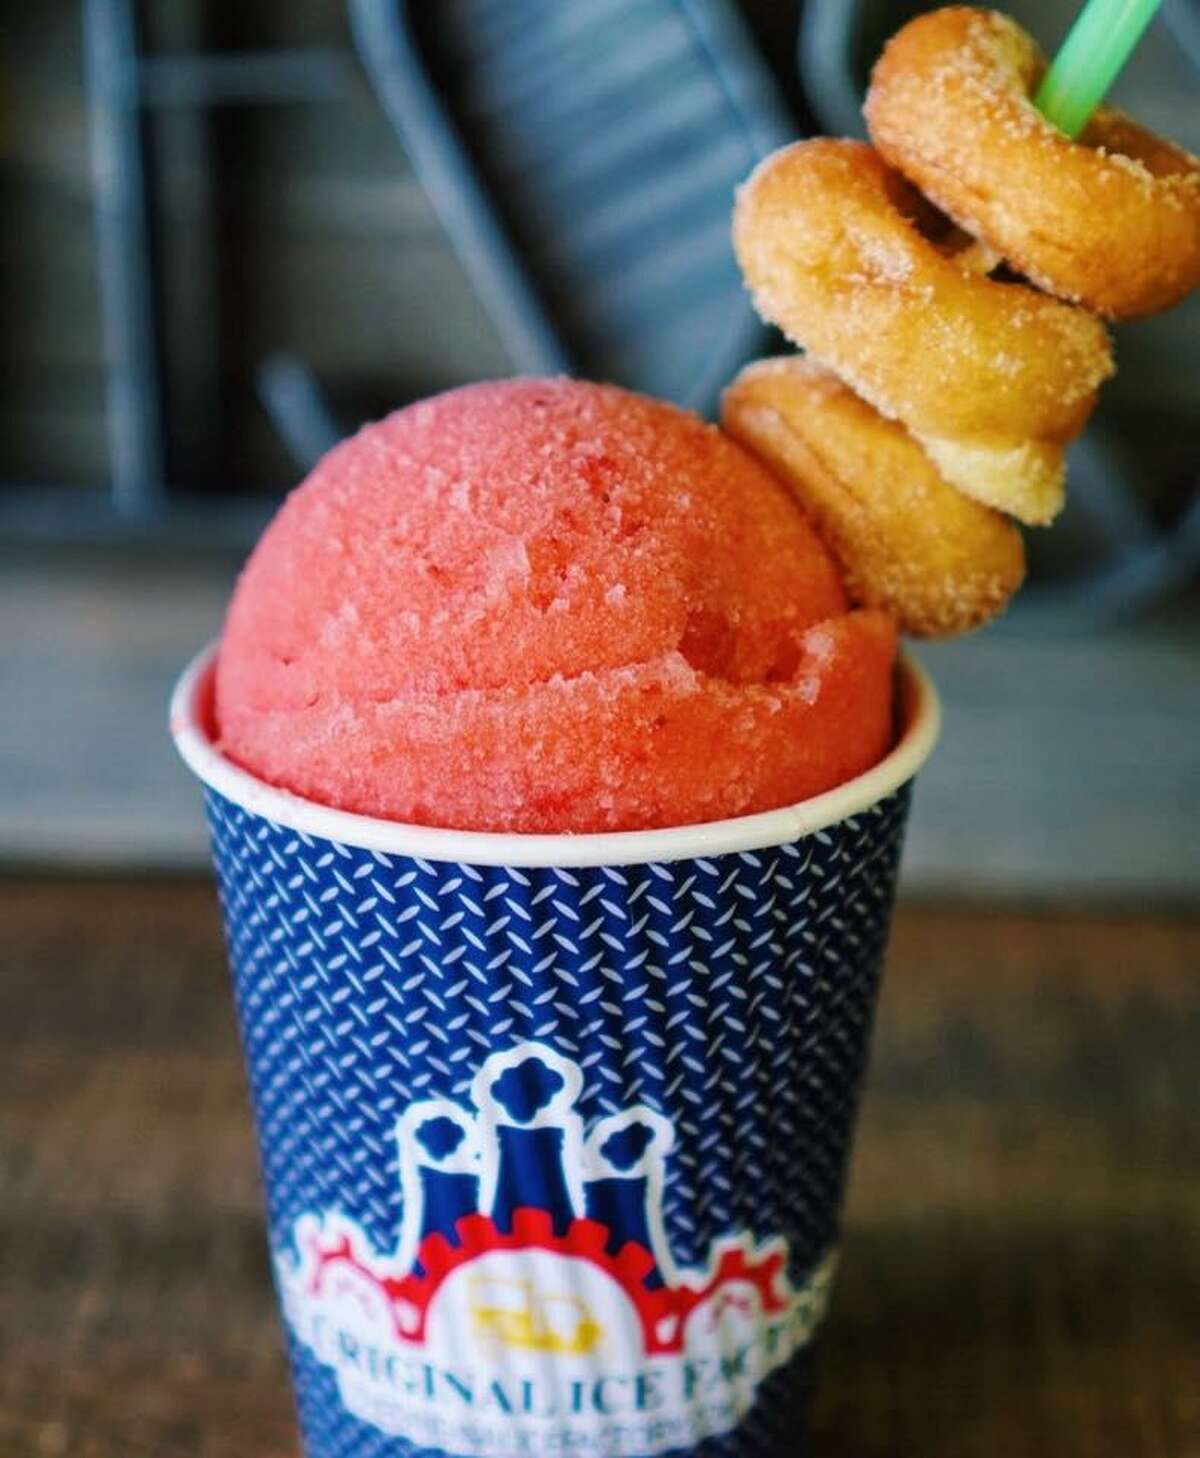 For a finishing touch, The Original Ice Factory will jab a spoon into your ice and string a few piping hot doughnuts over the handle.